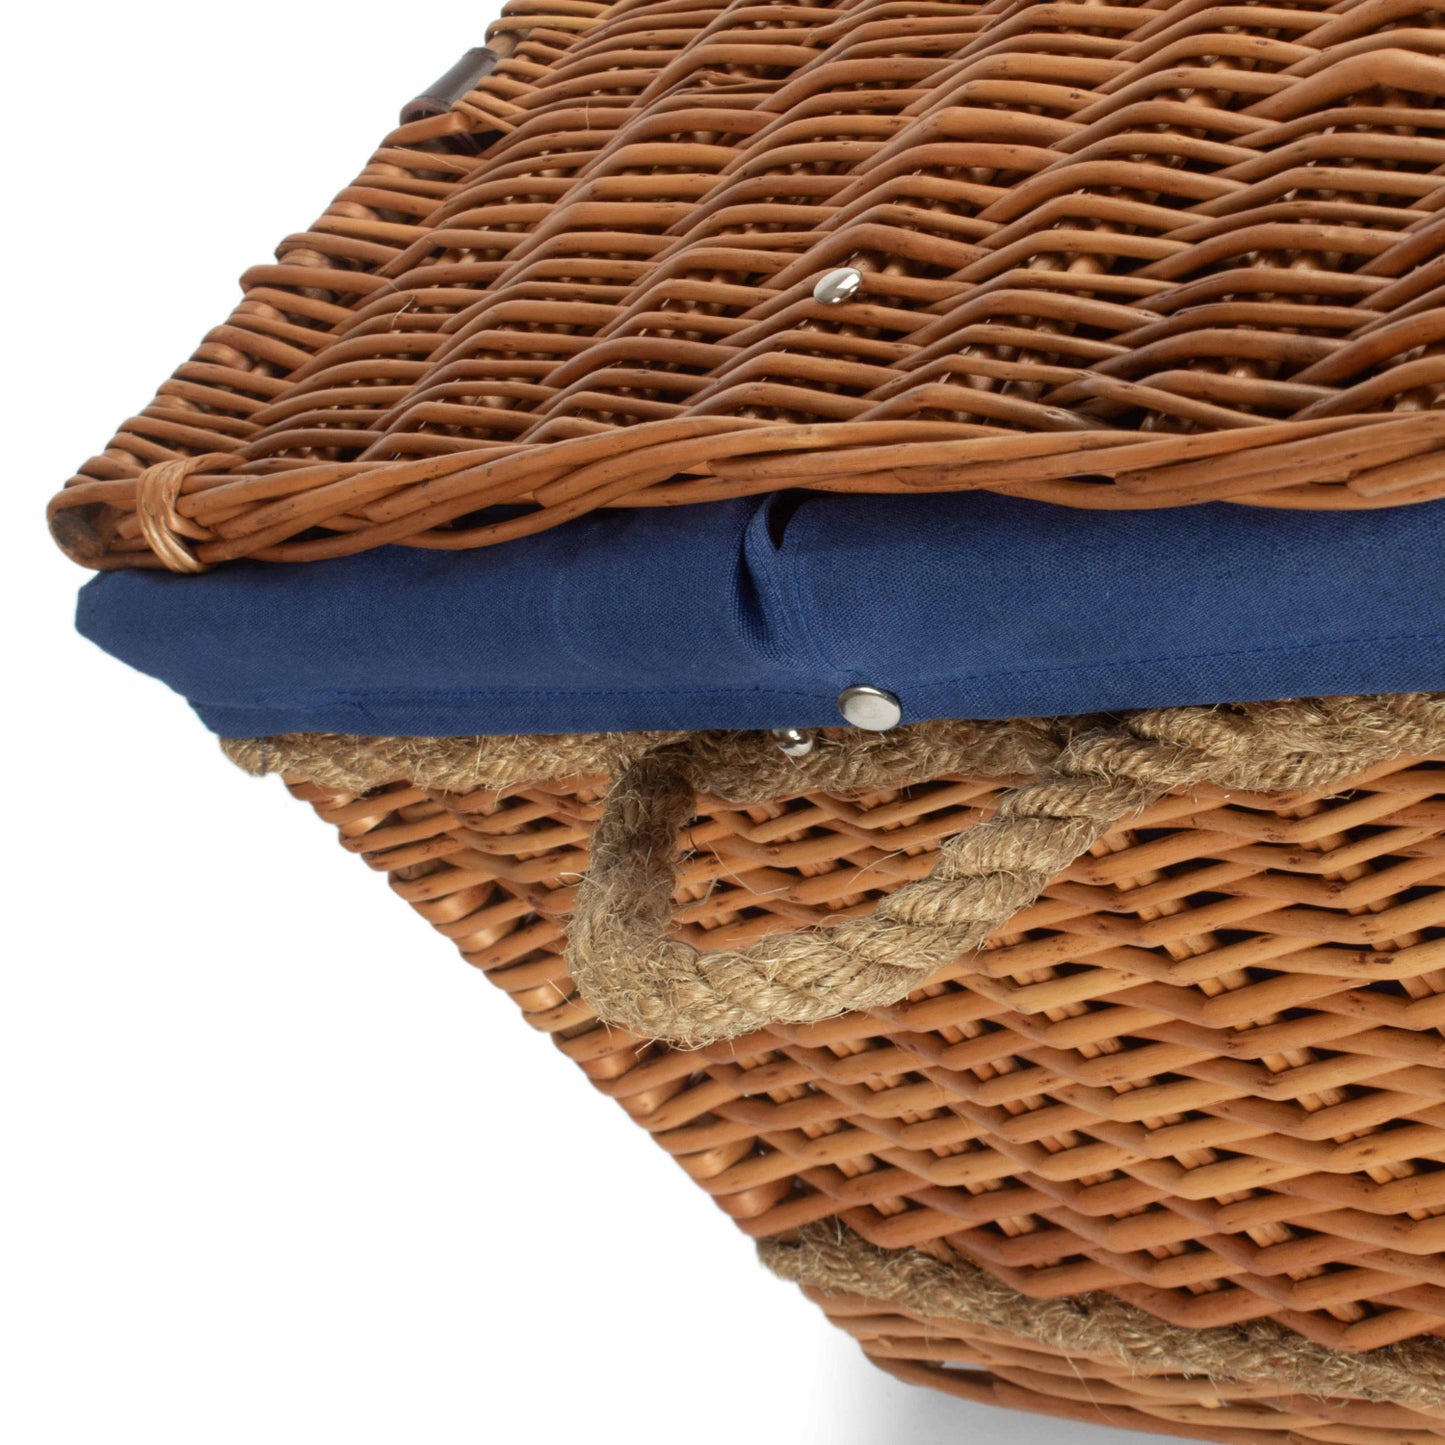 28 Inch Double Steamed Rope Handled Trunk With Navy Blue Lining